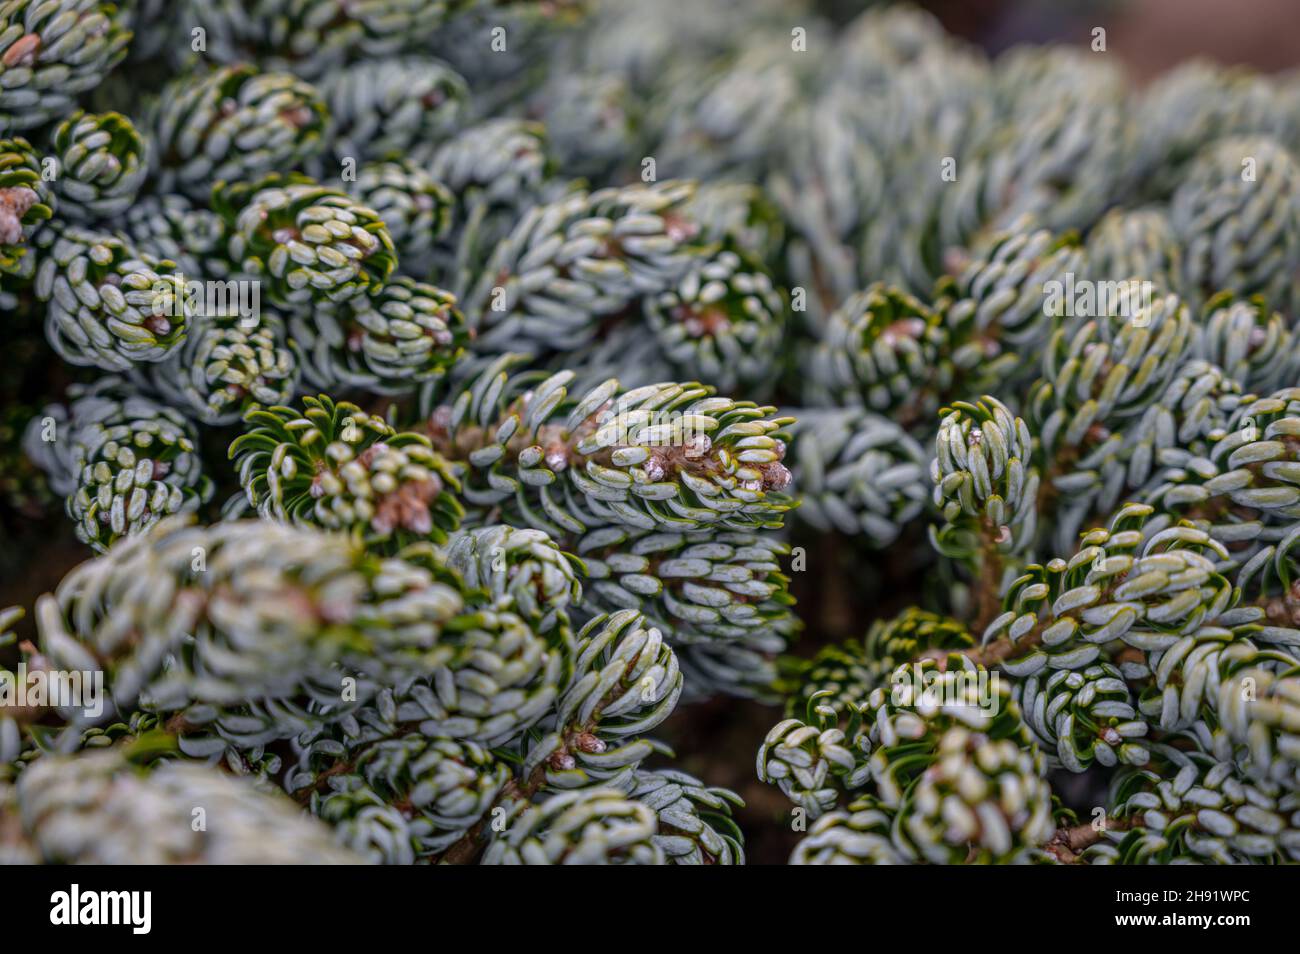 Botanical collection, young coniferous tree Abies koreana close up Stock Photo